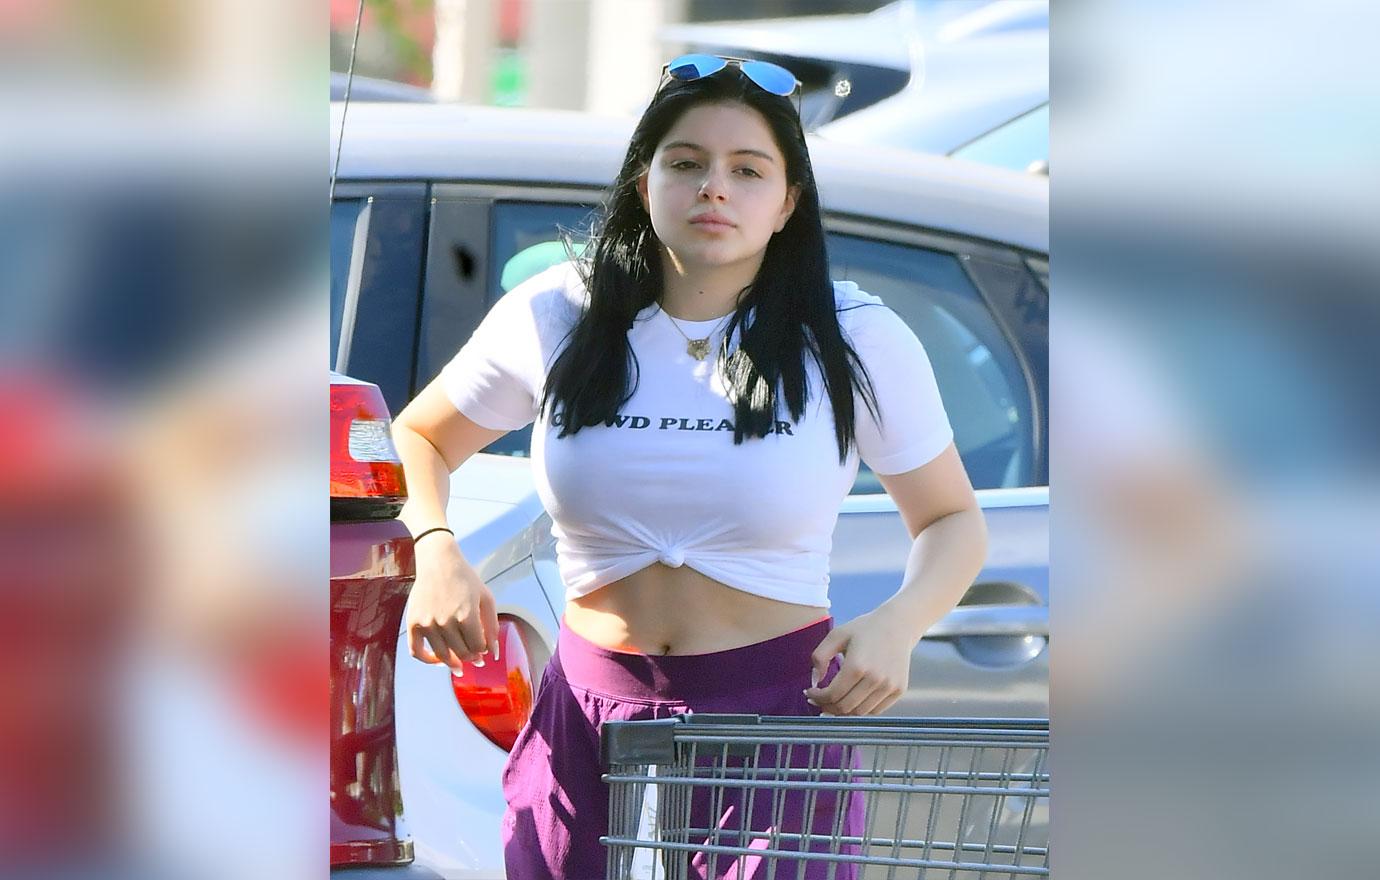 Pics Ariel Winter Bares Midriff During Solo Shopping Trip 